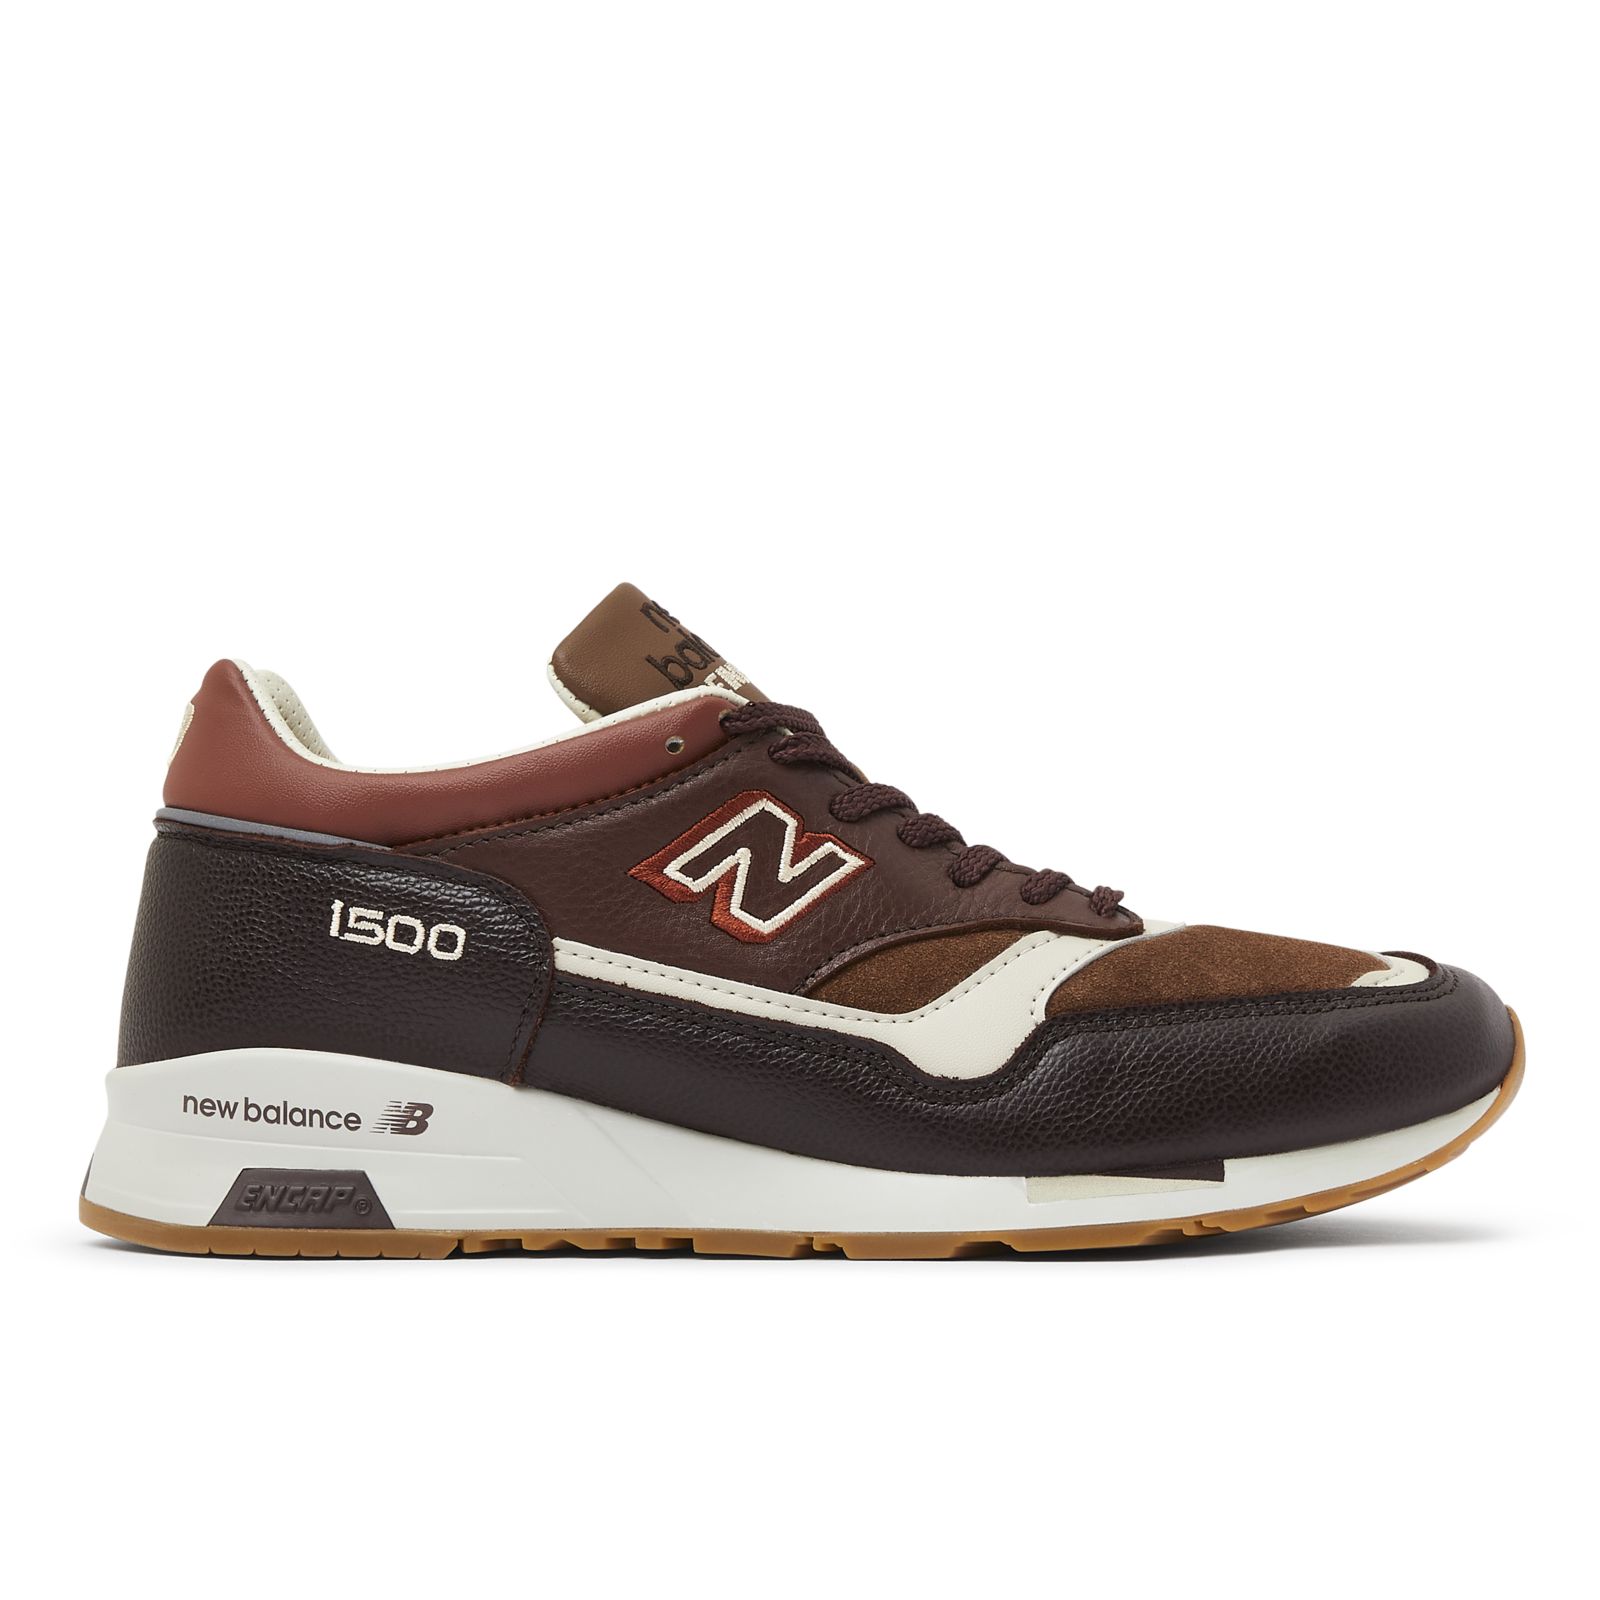 Idear arena Londres Men's MADE in UK 1500 Shoes - New Balance